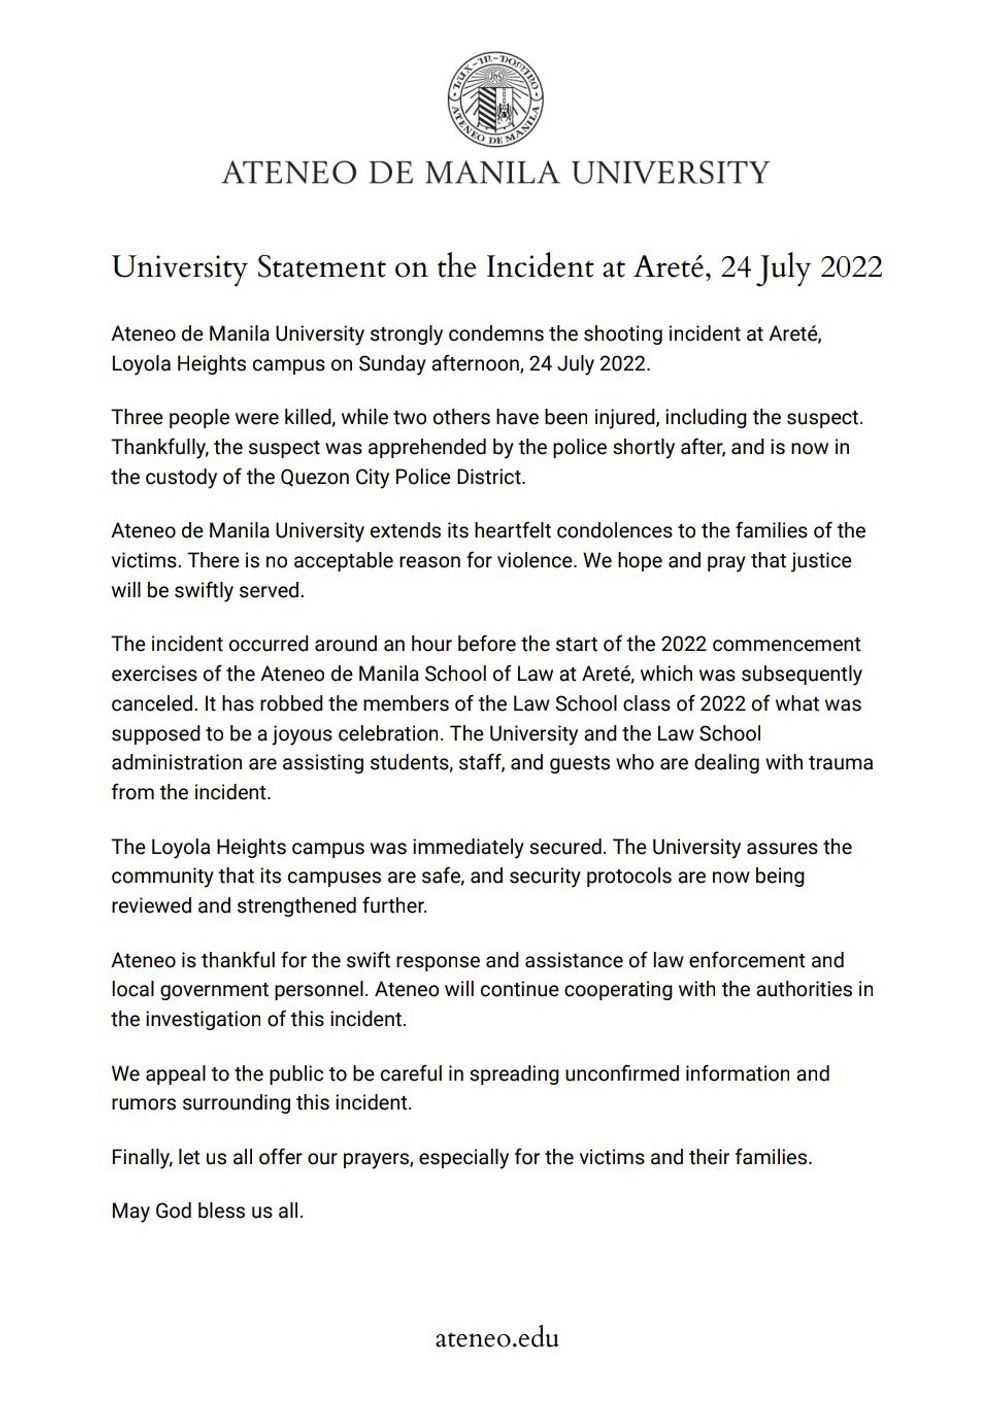 Ateneo de Manila University releases official statement regarding the incident that occurred at Areté in the morning of July 24, 2022